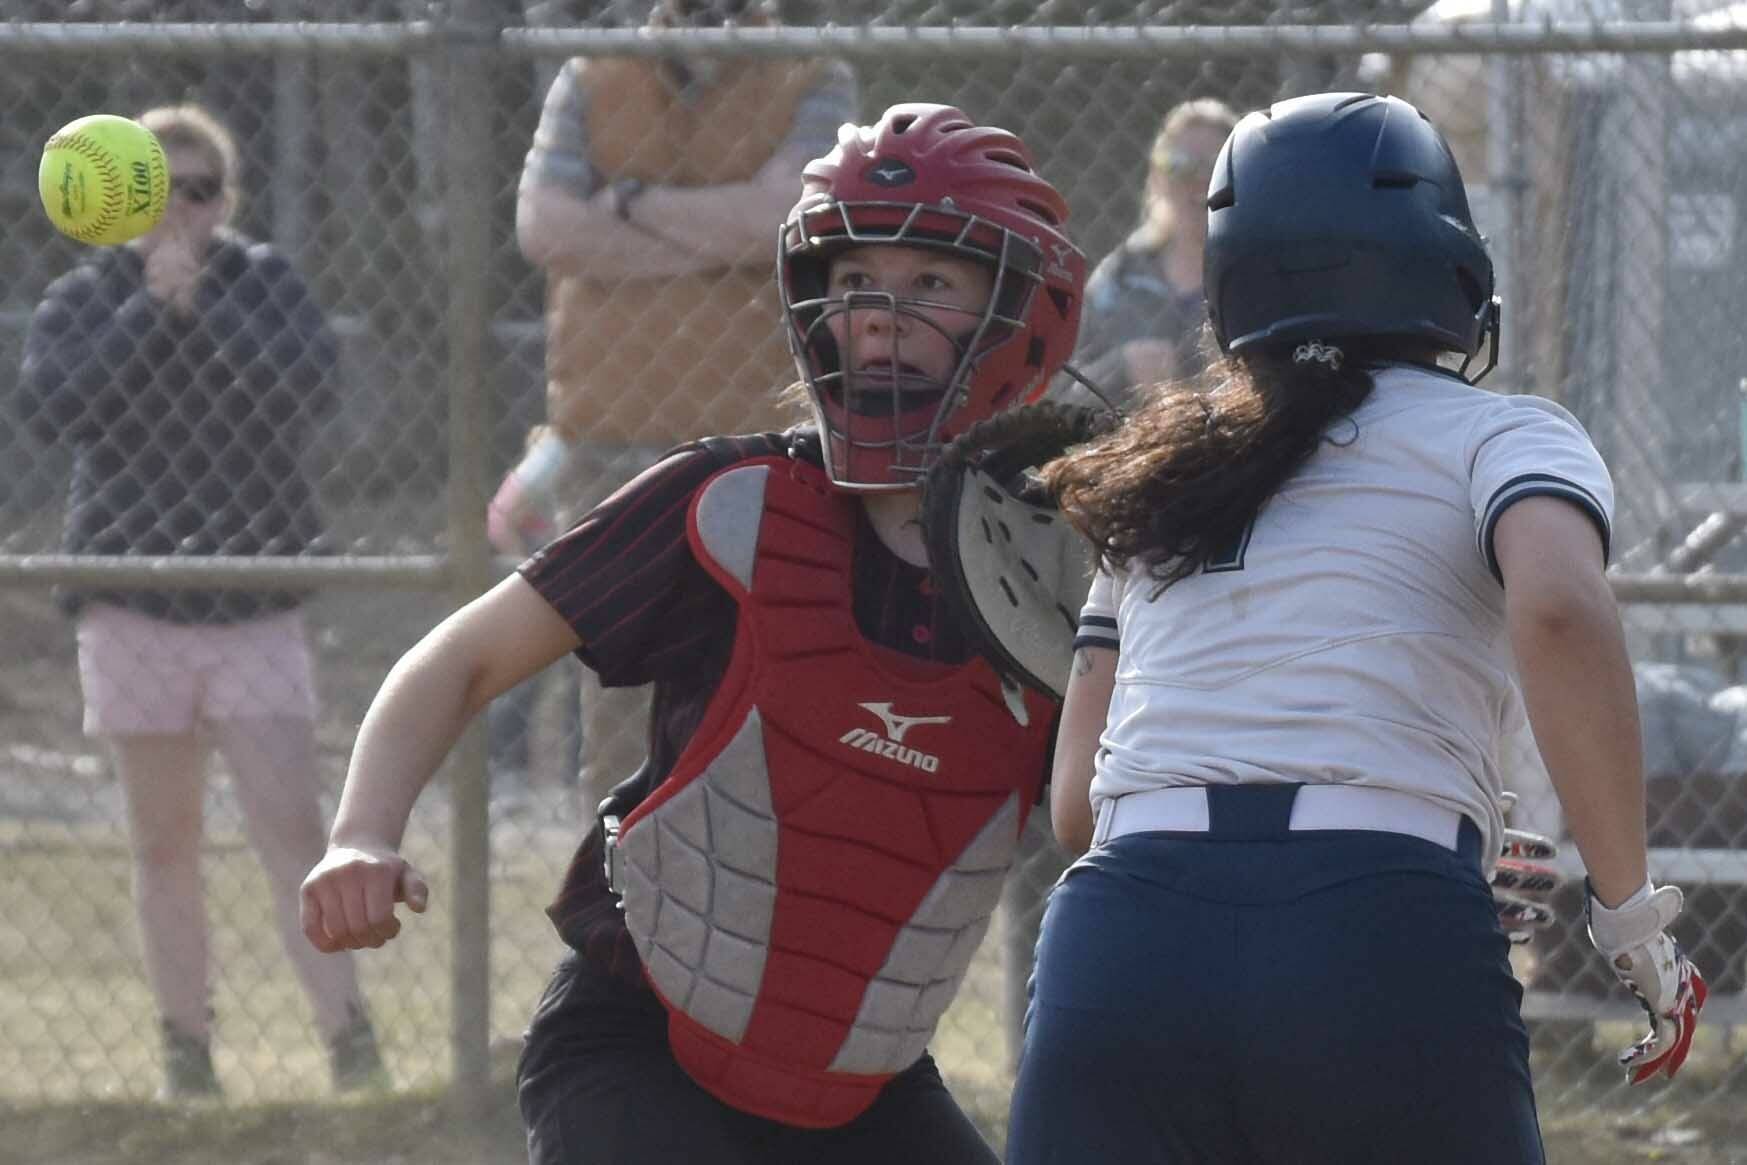 Kenai Central catcher Maggie Grenier gets ready to tag Soldotna's Miah Mead to end a rundown Thursday, May 18, 2023, at the Soldotna Little League fields in Soldotna, Alaska. (Photo by Jeff Helminiak/Peninsula Clarion)